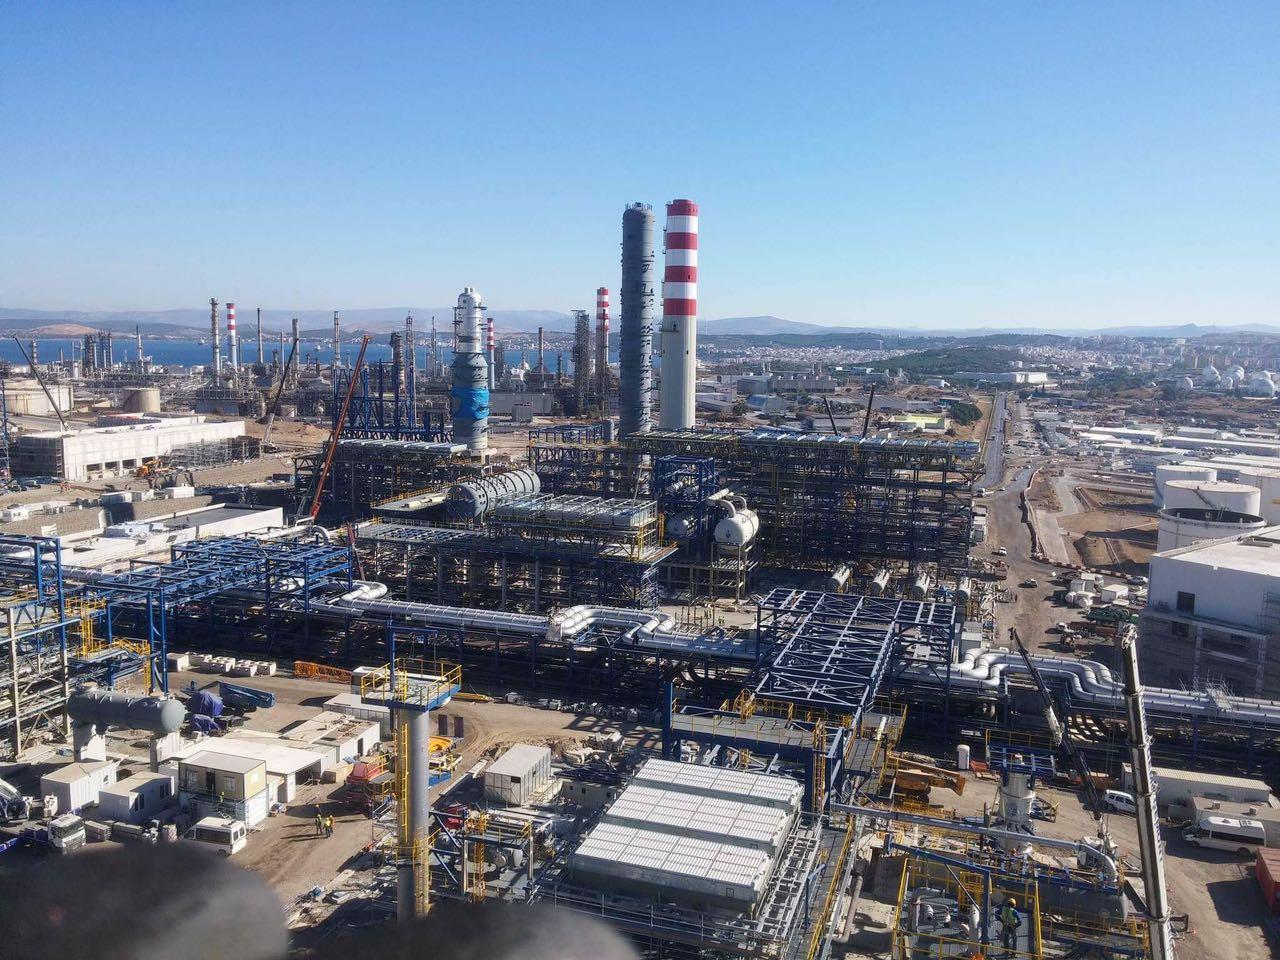 STAR refinery boosts oil production in Q1